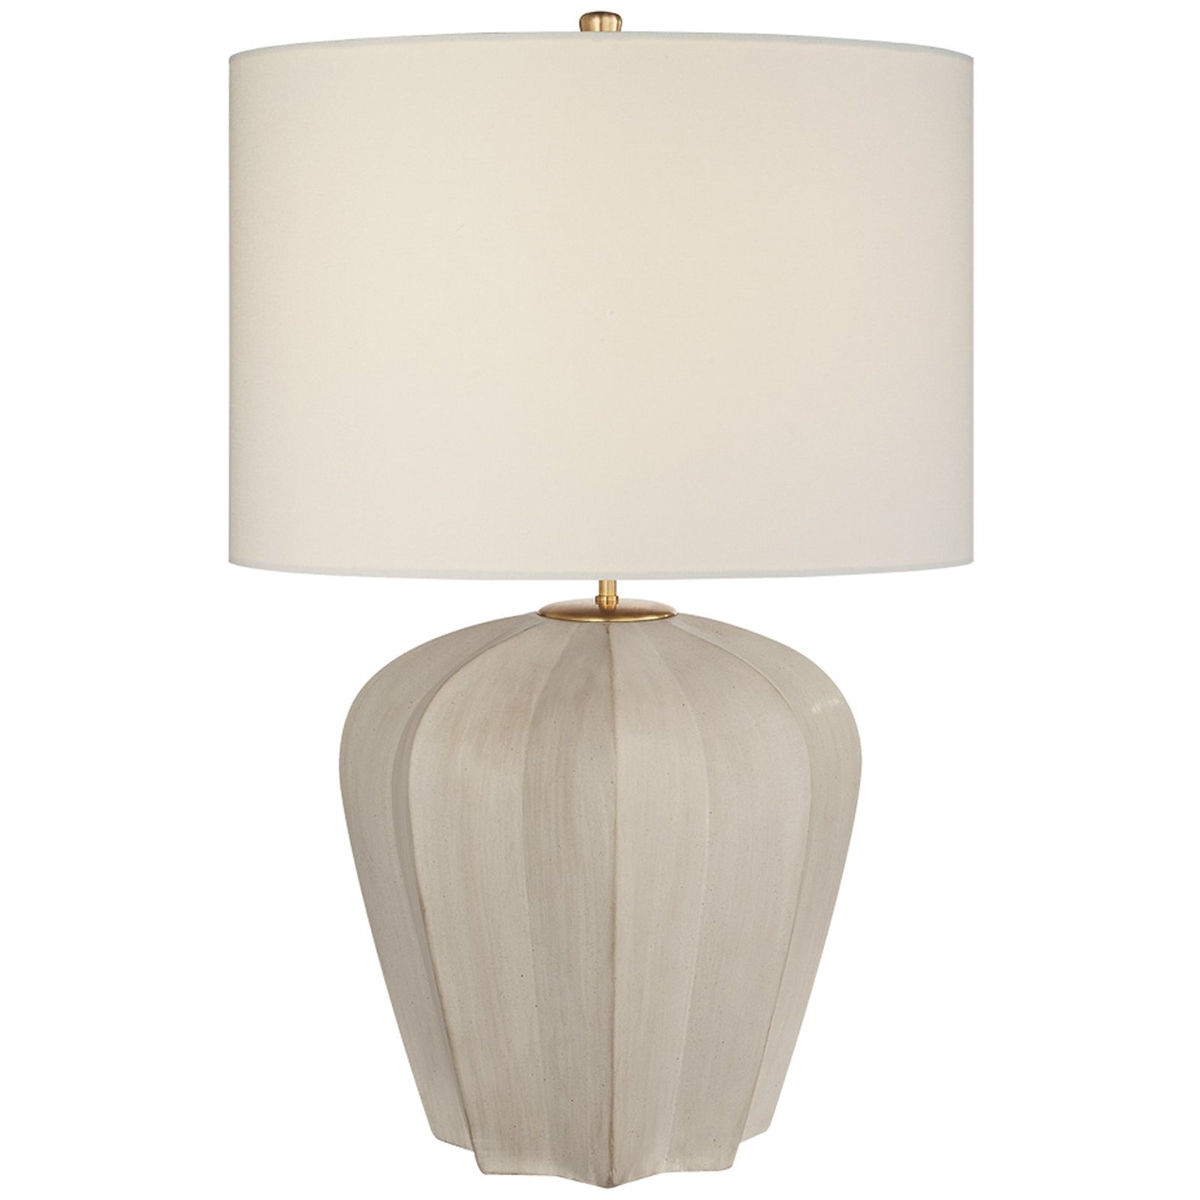 Pierrepont Table Lamp, Taupe